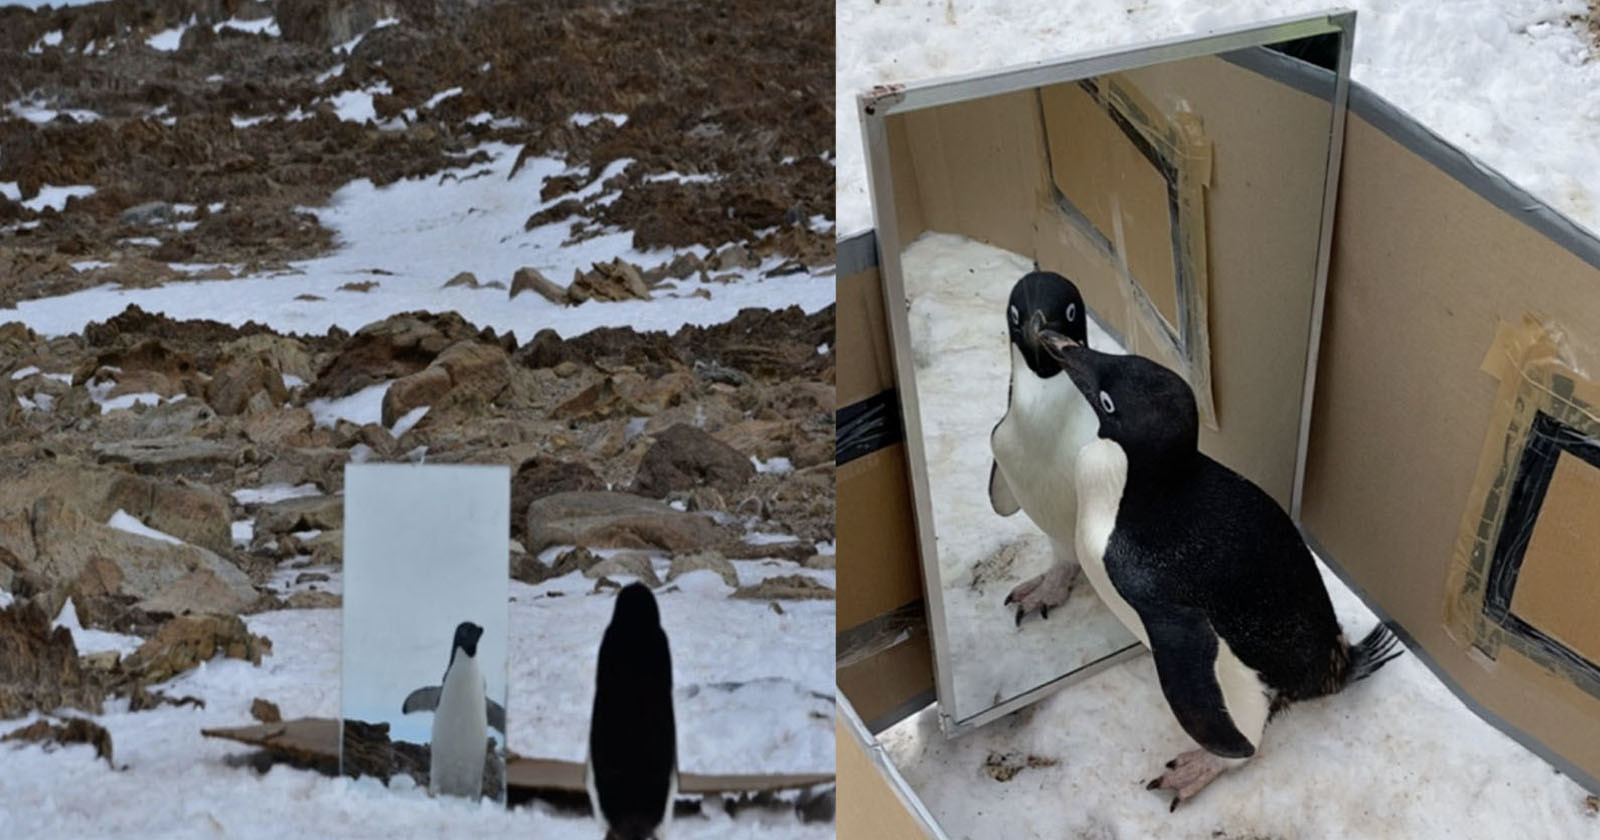 Scientists Photograph Penguins Displaying Signs of Self-Awareness